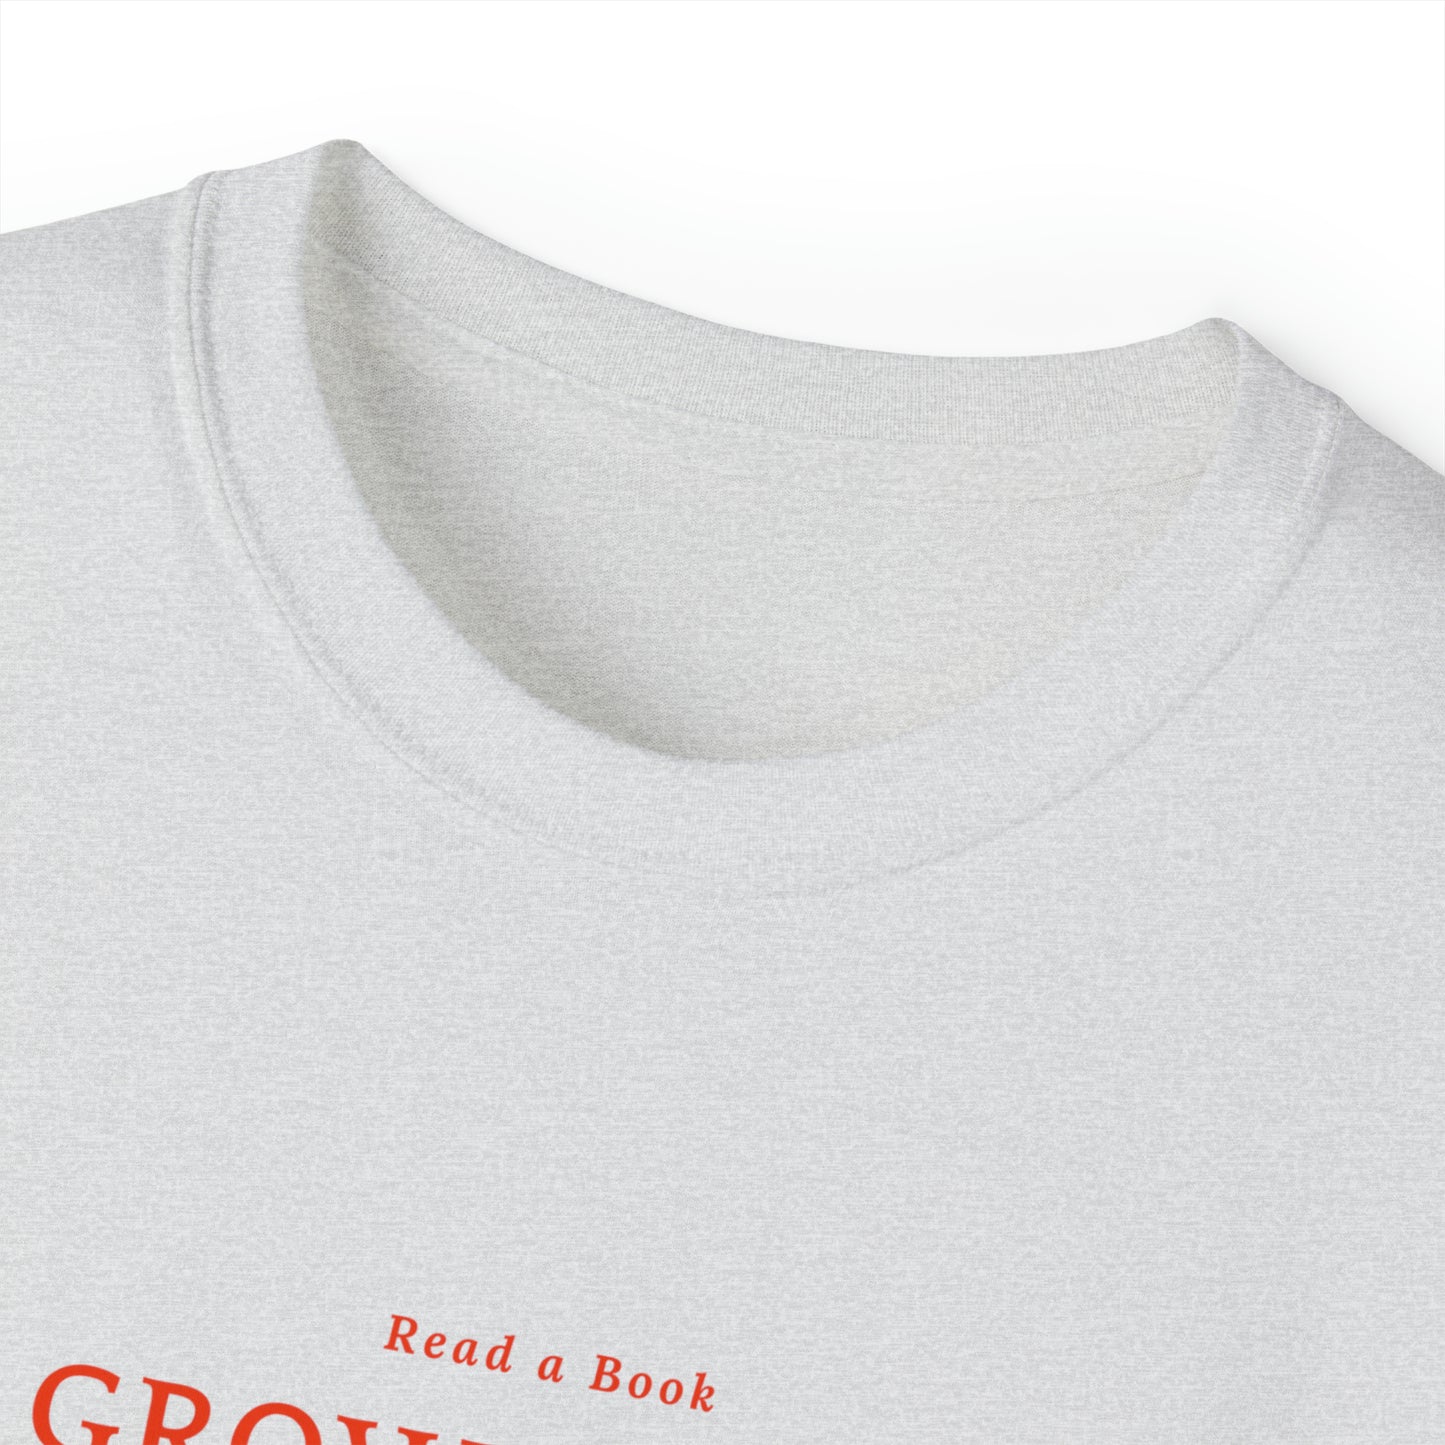 Read a Book, Watch your Imagination Grow-Unisex Ultra Cotton Tee